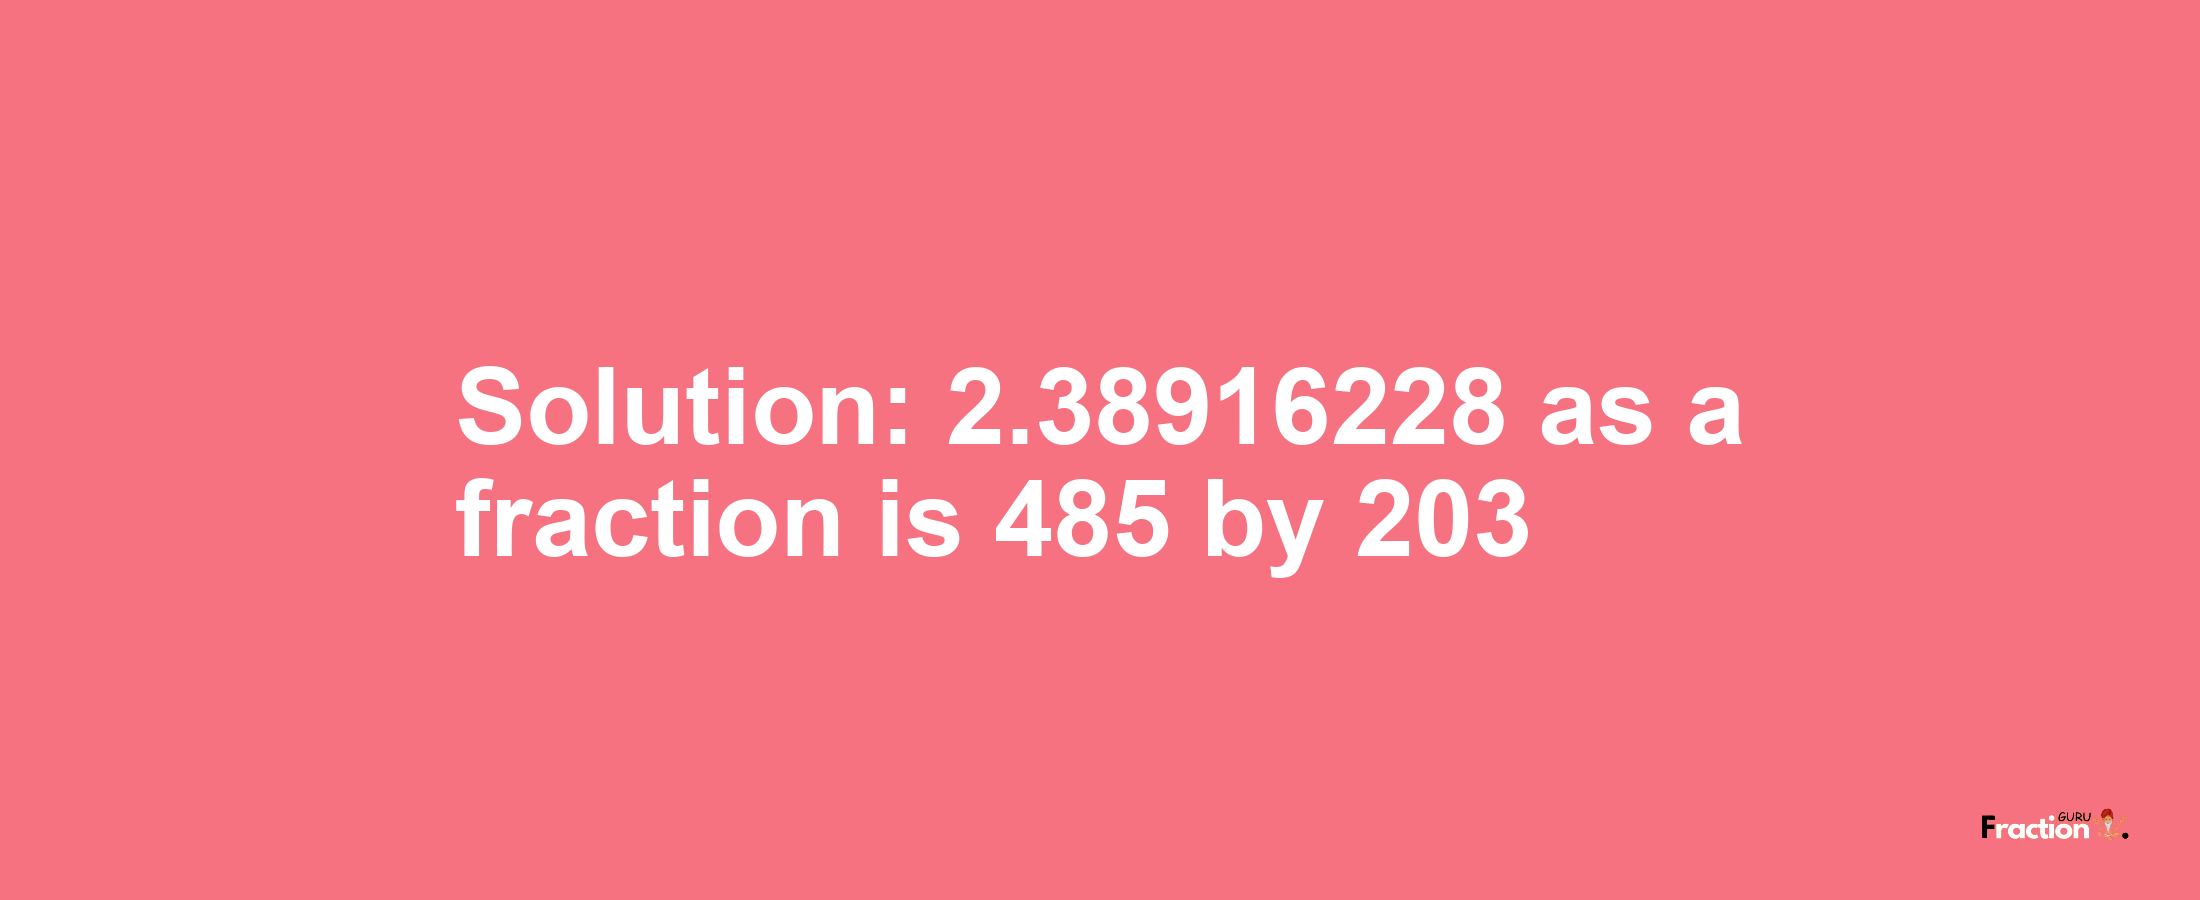 Solution:2.38916228 as a fraction is 485/203